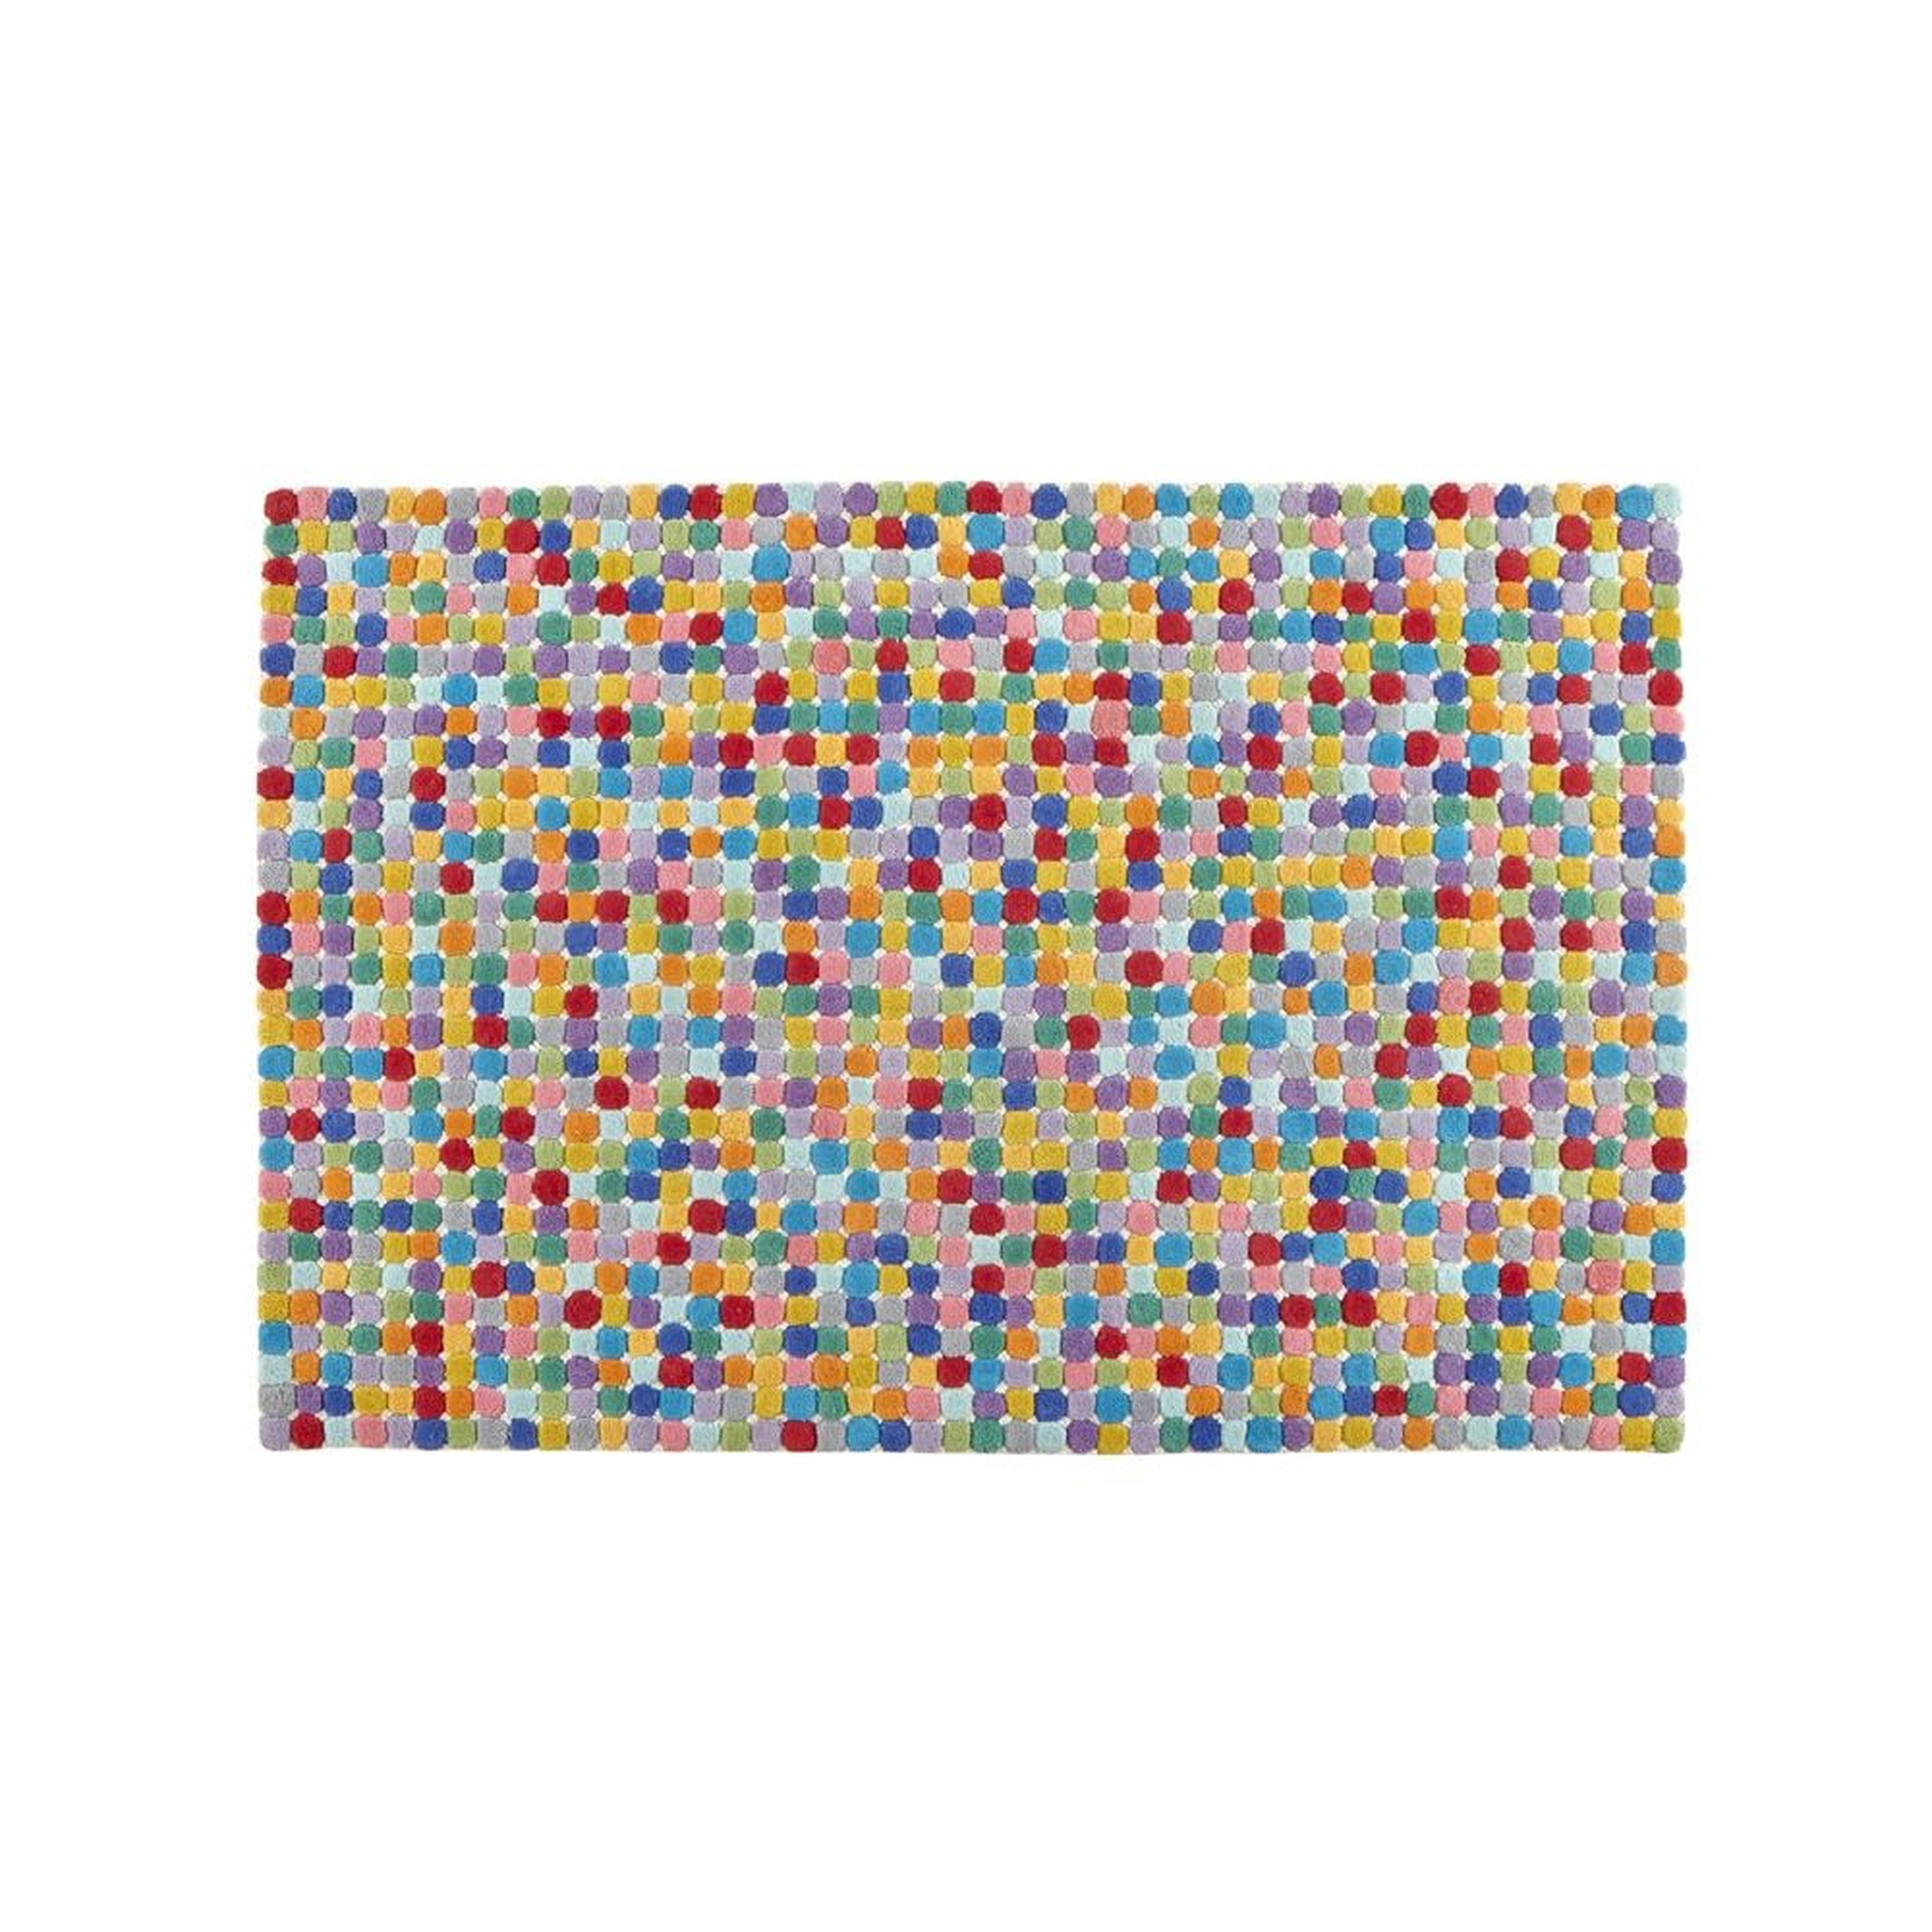 Hand-Tufted Rainbow Polka Dot Kids Colorful Rug 8x10 - Crate and Barrel